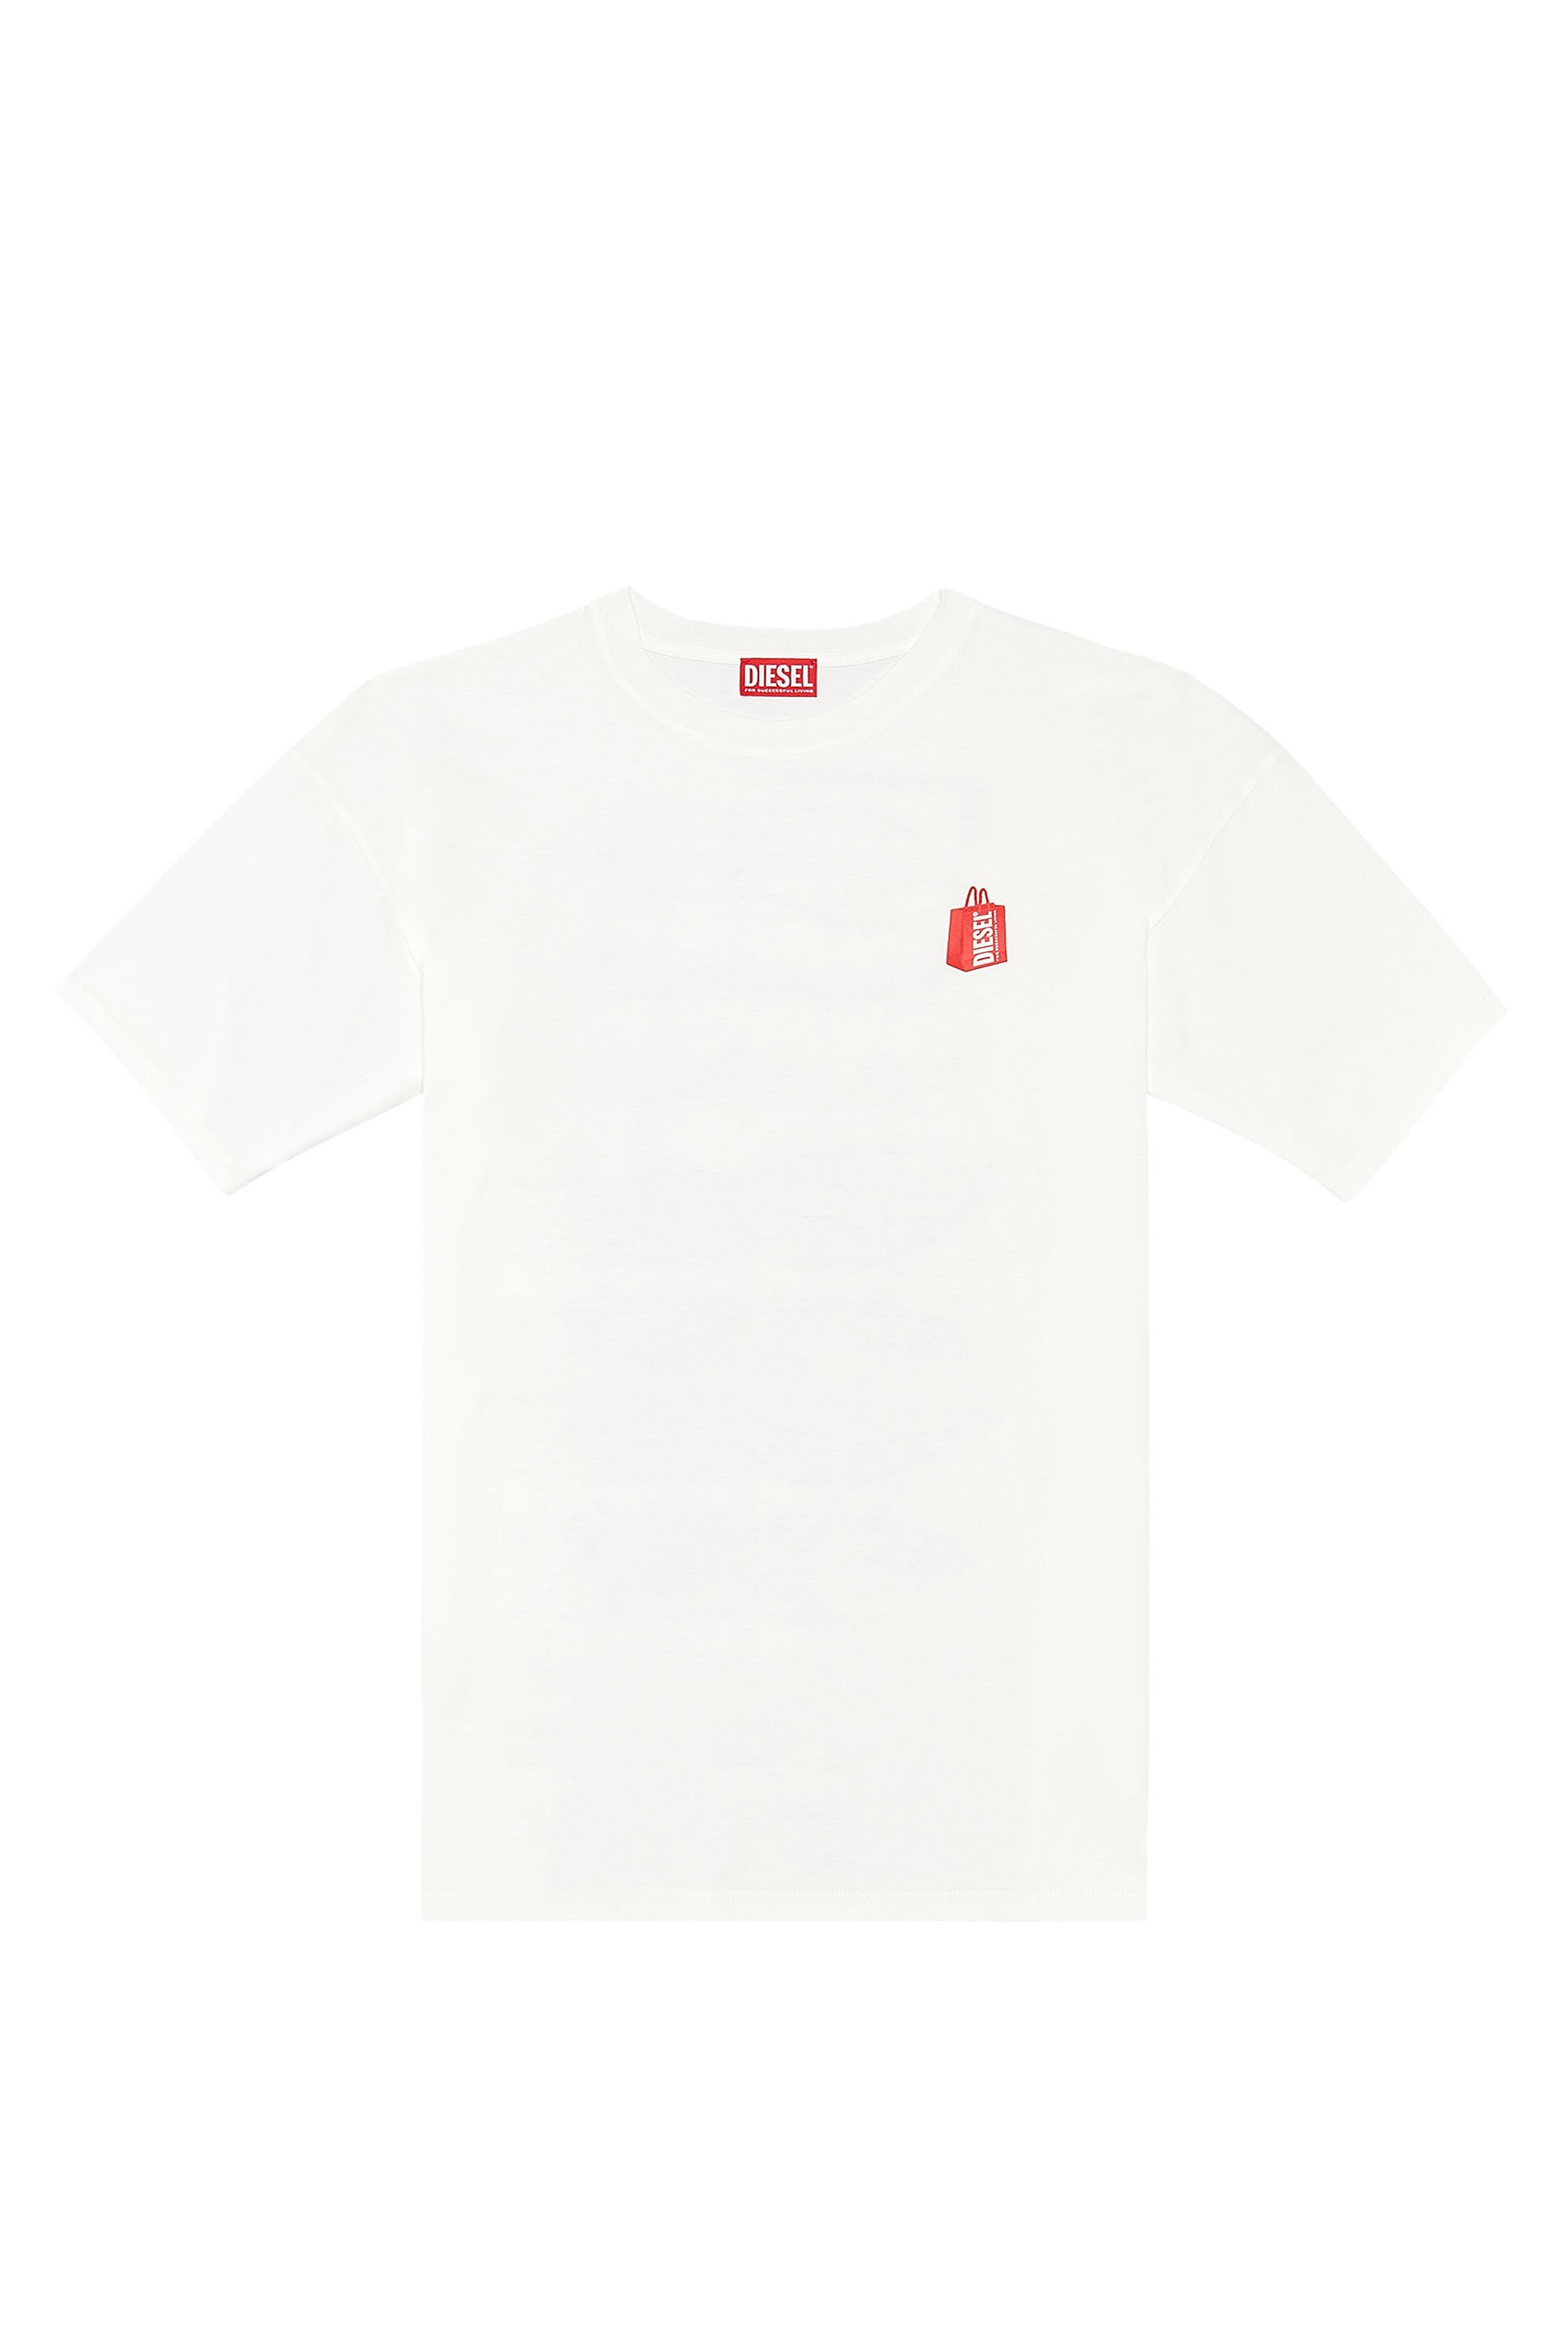 Diesel - T-BOXT-N2, Man T-shirt with Prototype sneaker print in White - Image 2